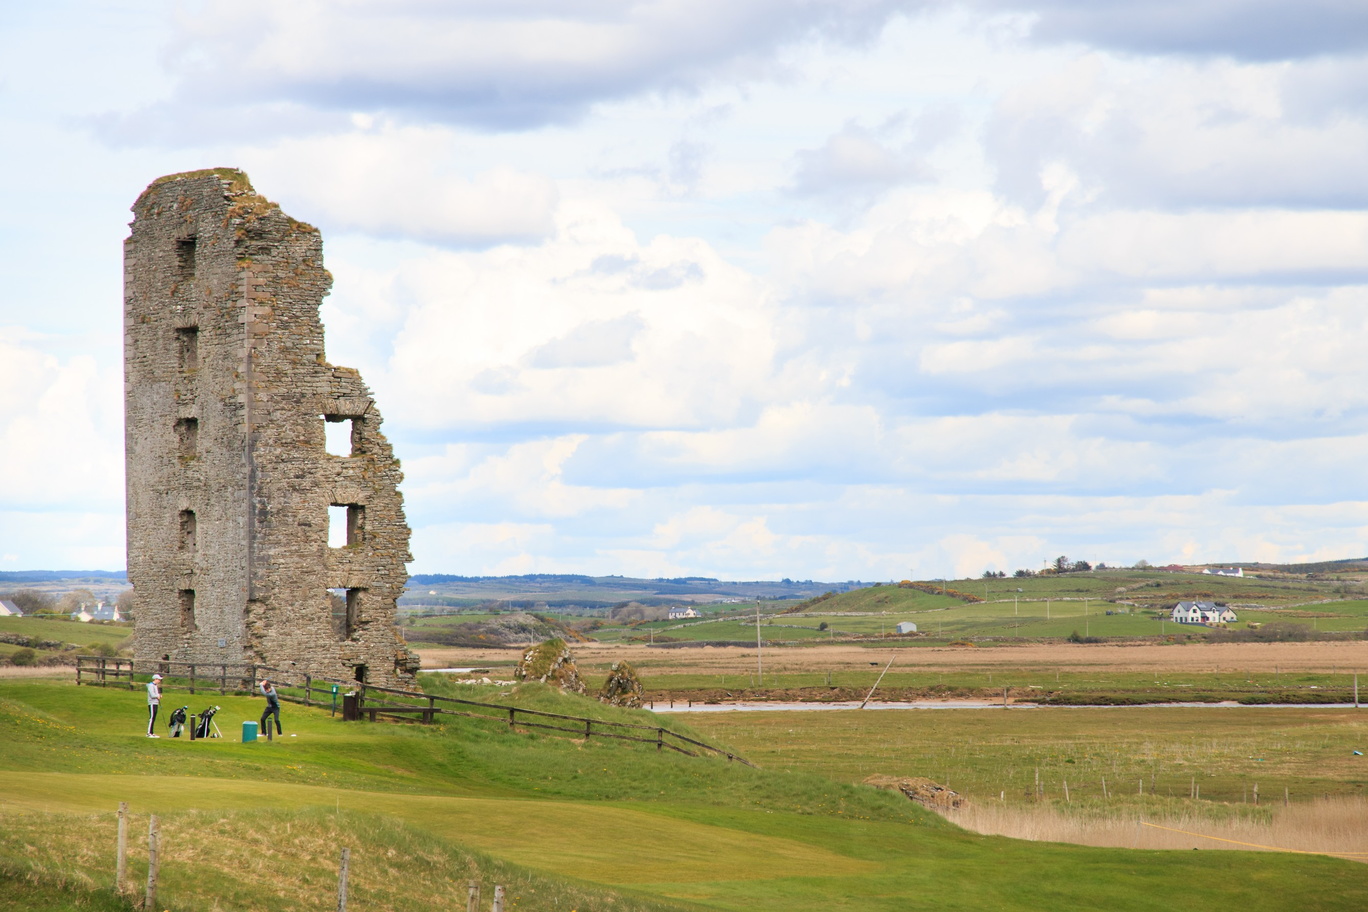 Ireland-0210-Just playing golf with a blown up castle at the tee..jpg